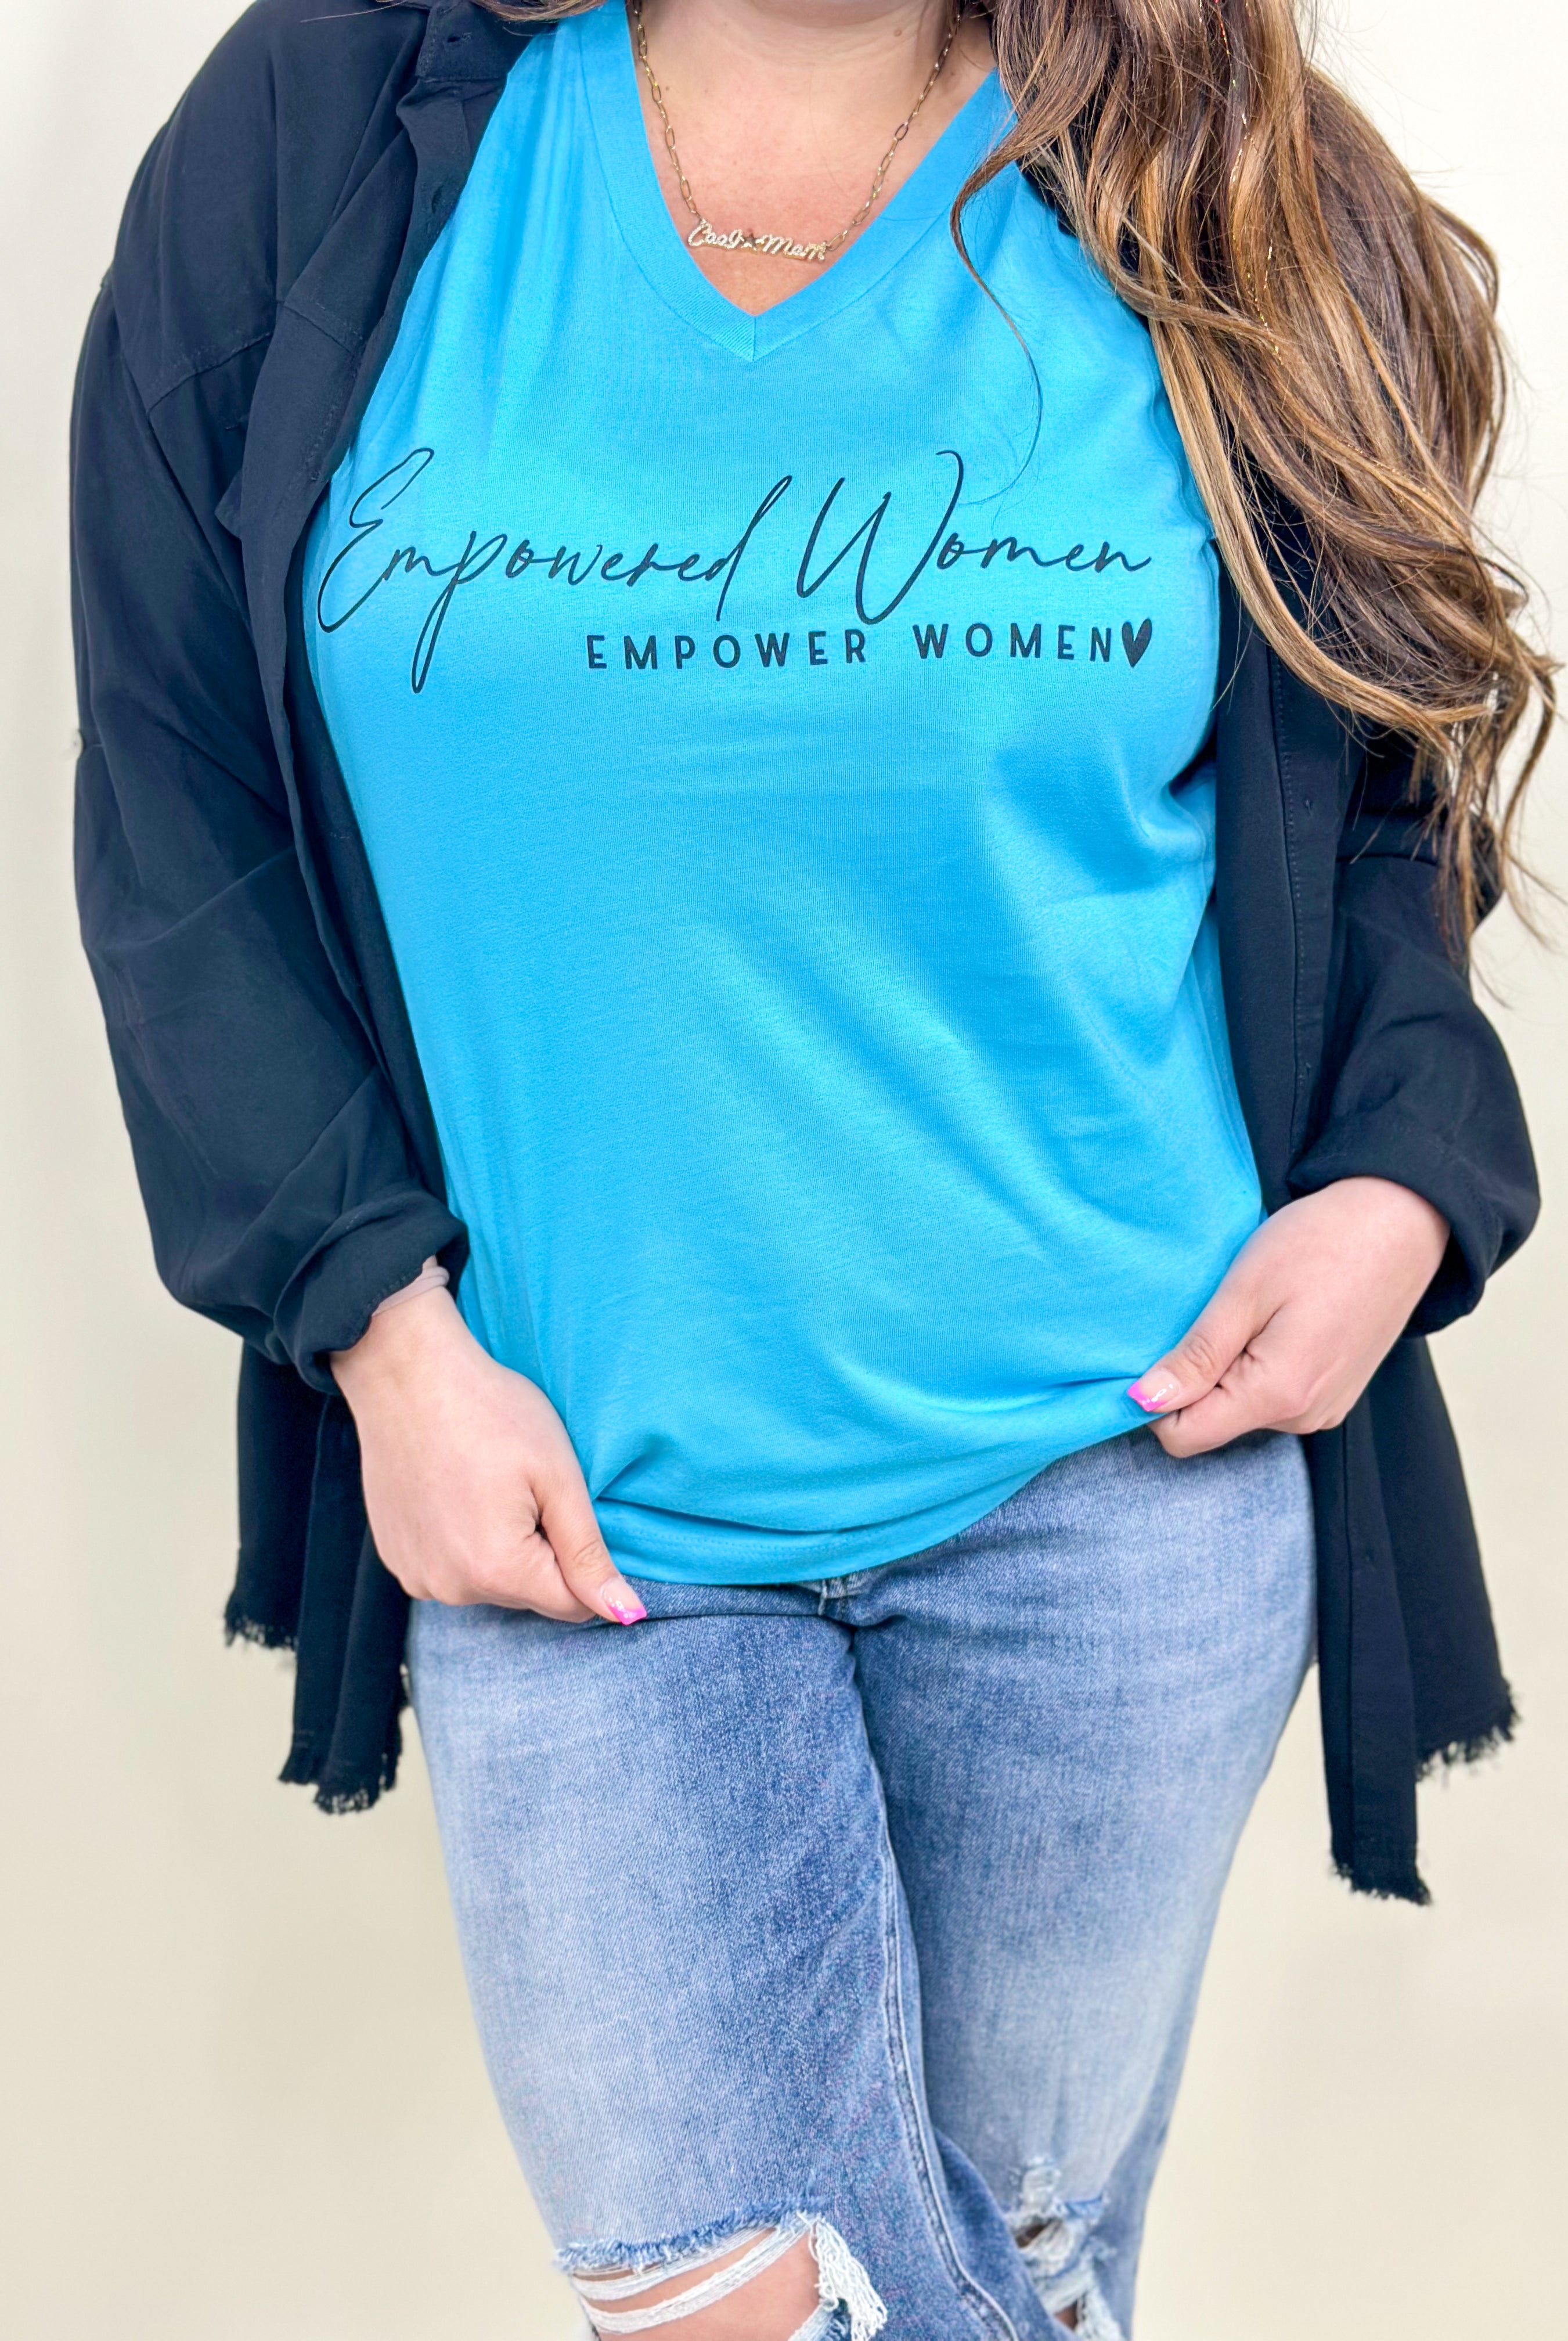 Empowered Women Graphic Tee-110 Short Sleeve Top-Heathered Boho-Heathered Boho Boutique, Women's Fashion and Accessories in Palmetto, FL